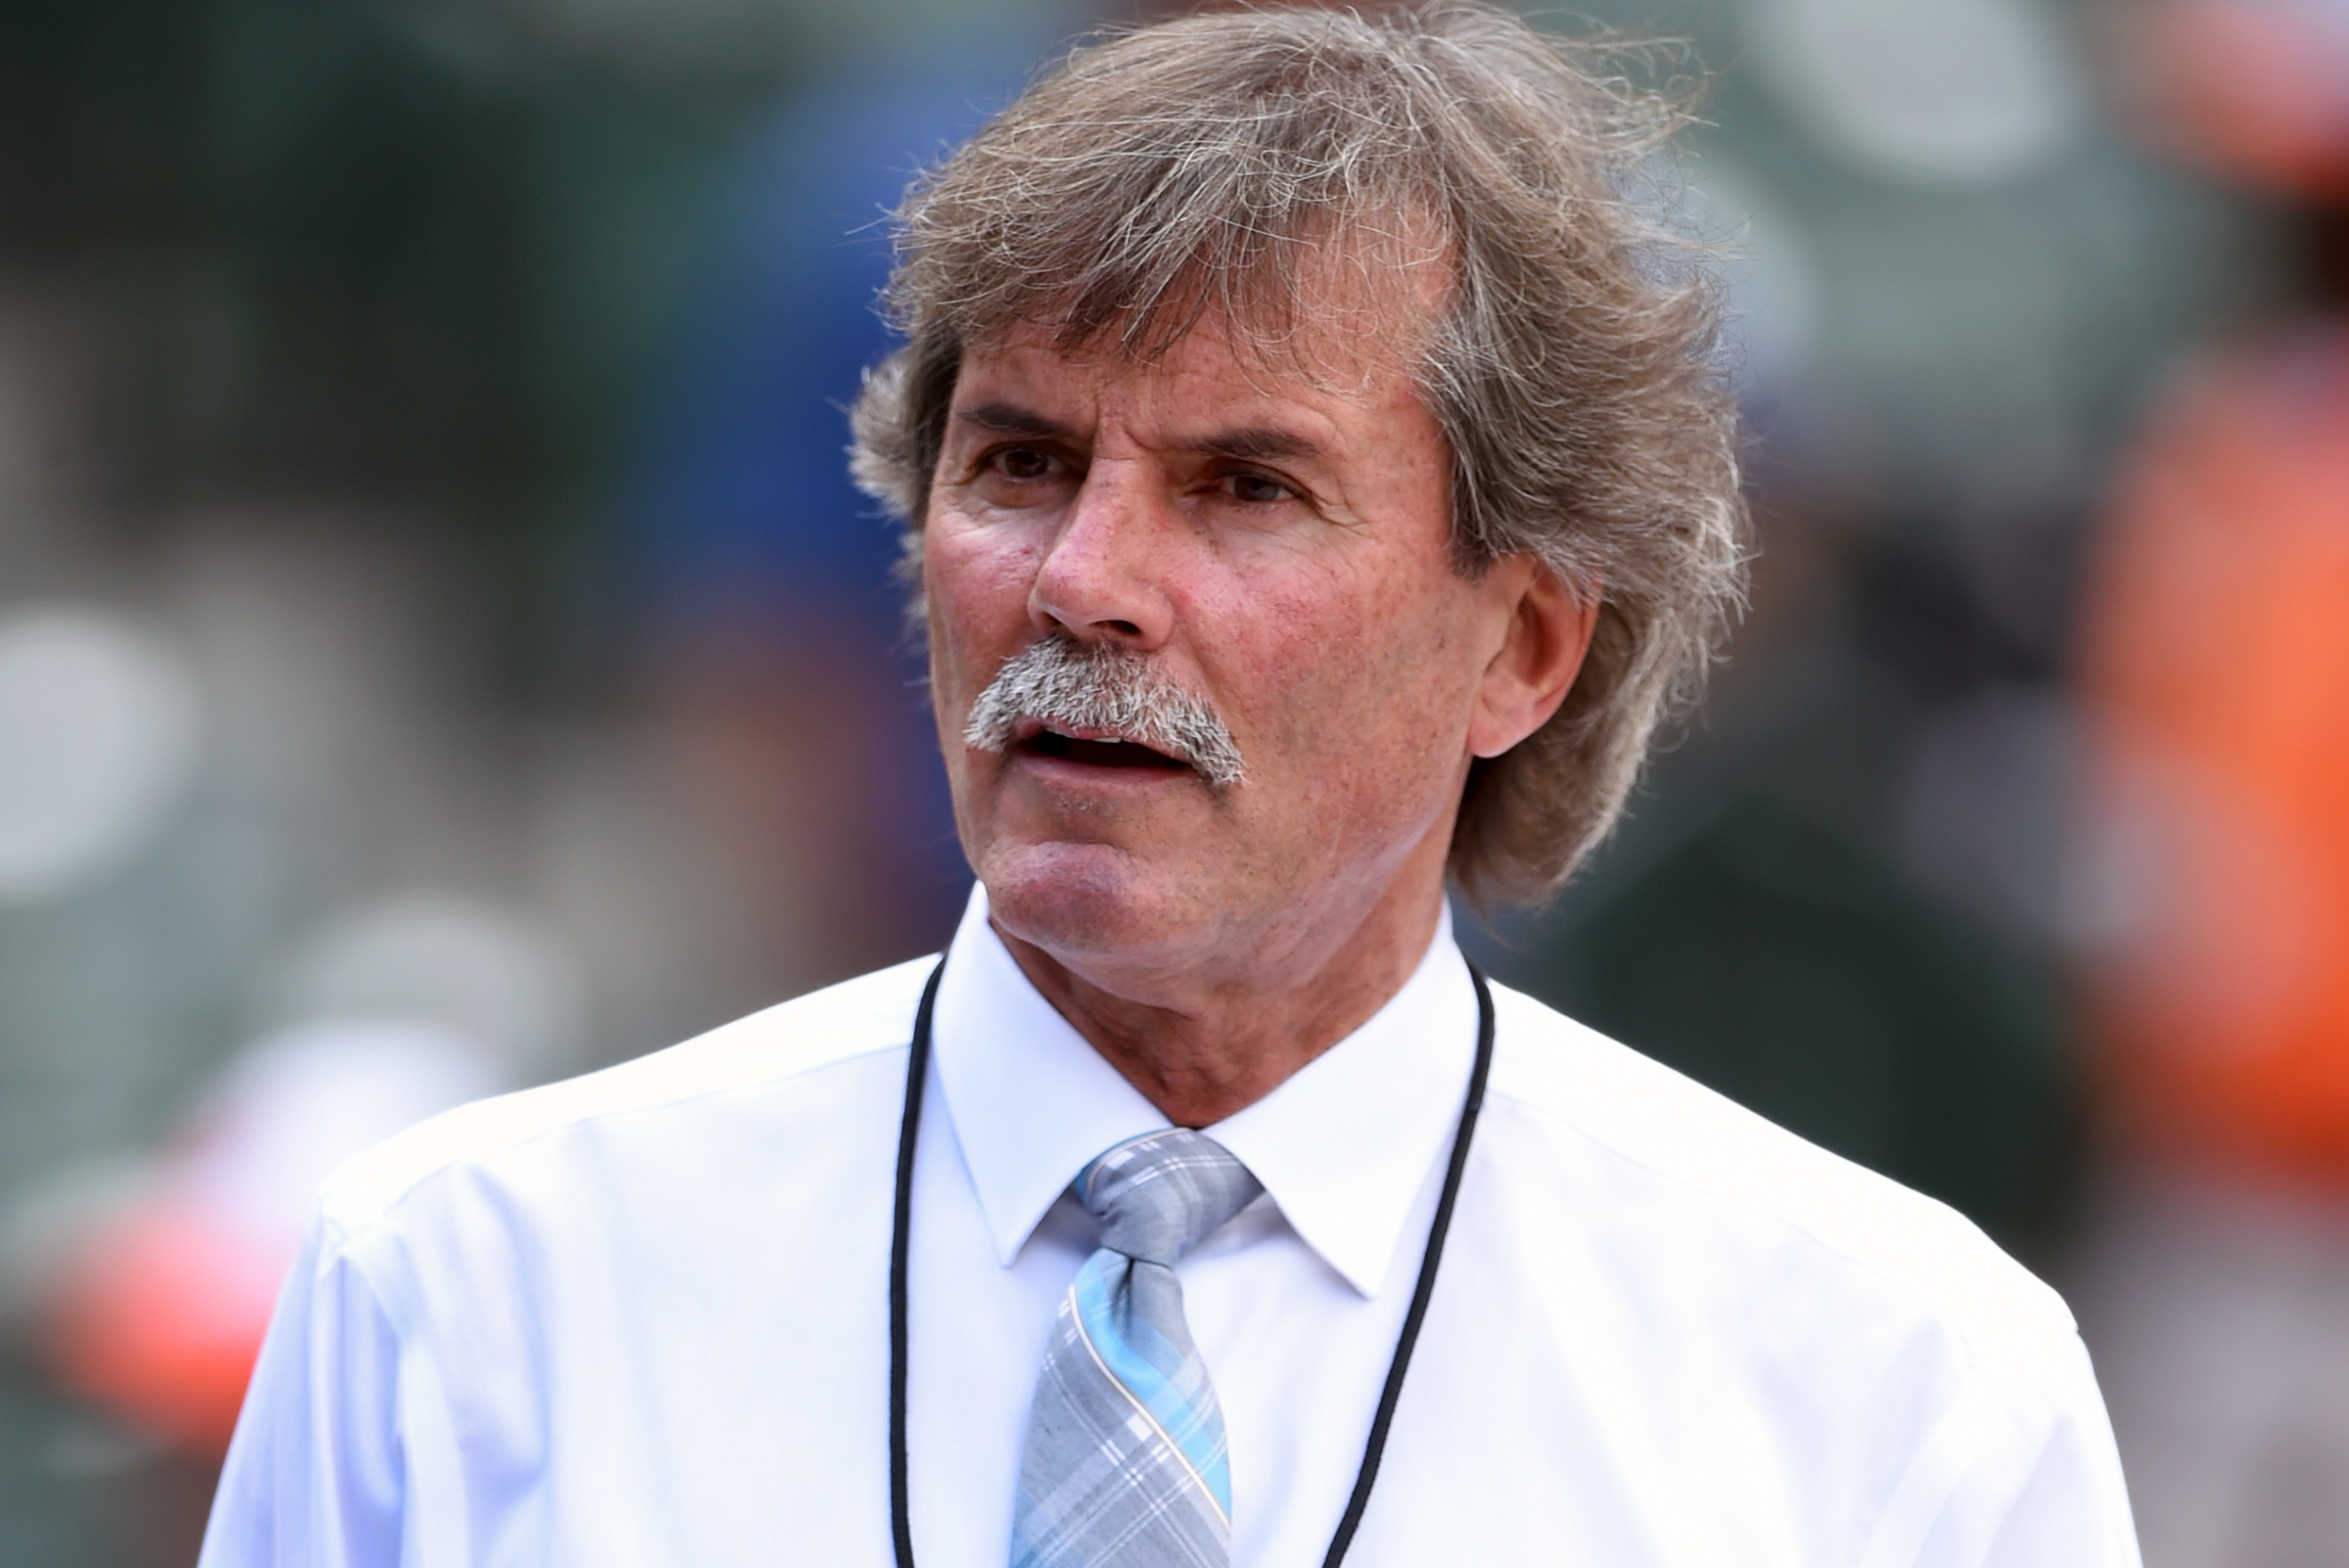 Angelo7266 on X: This is Dennis Eckersley he pitched for the